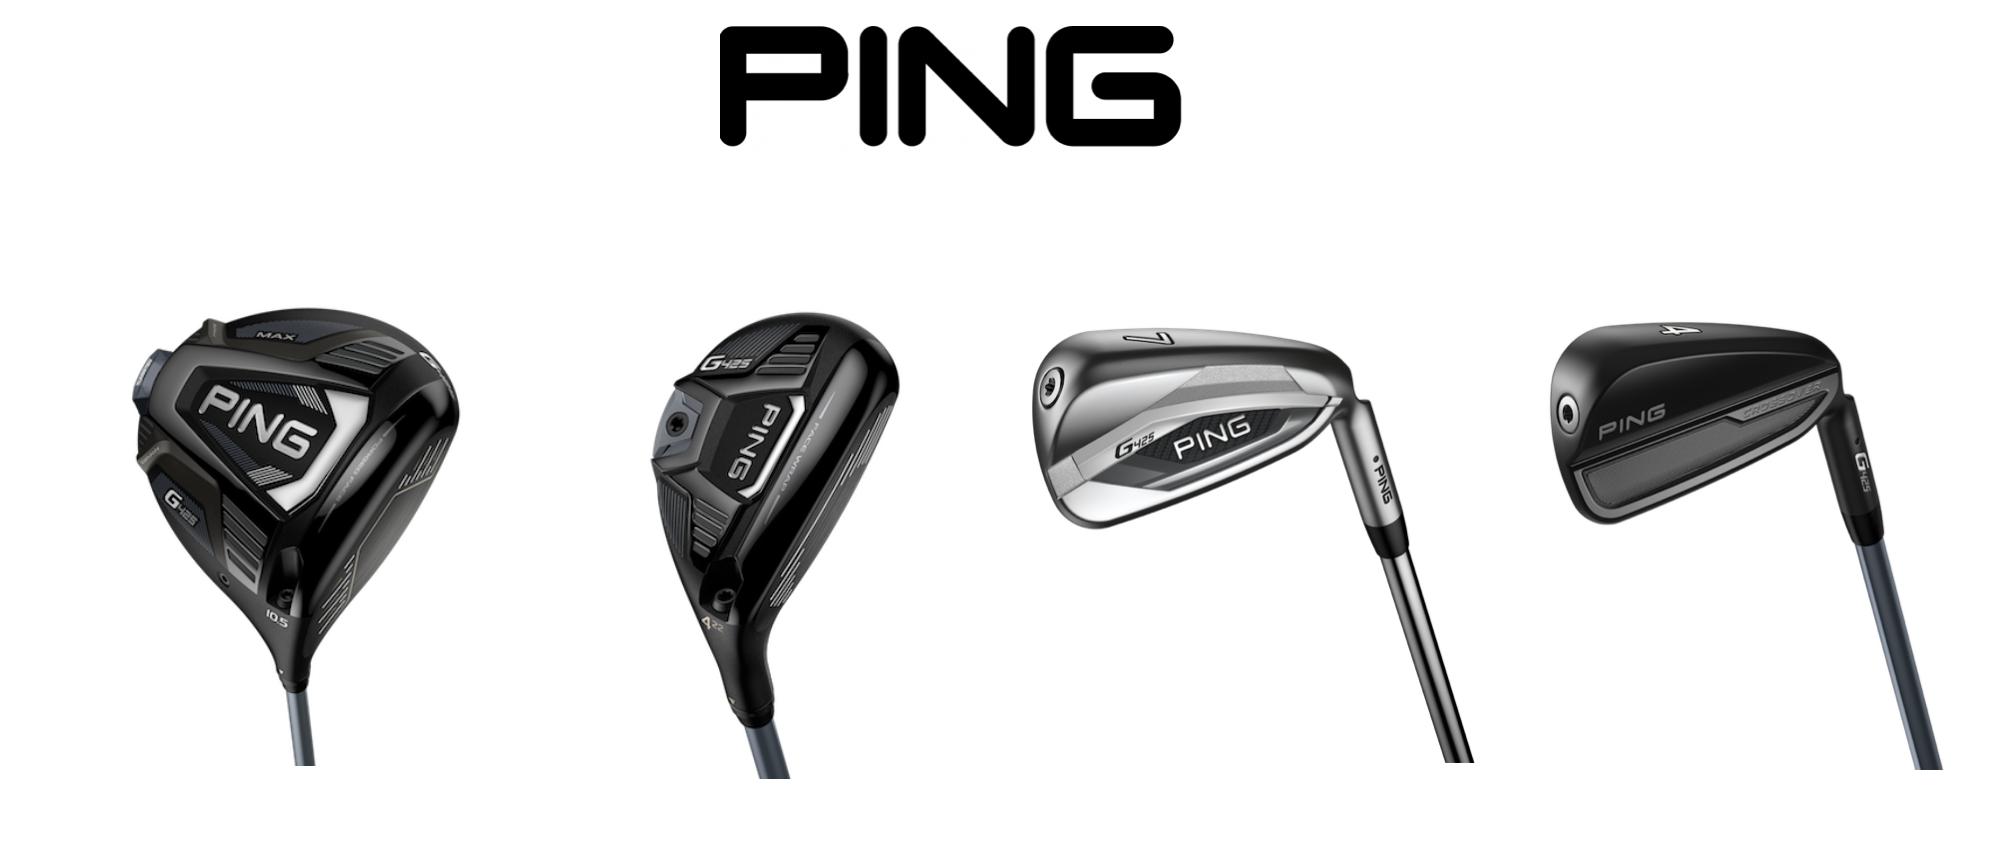 PING INTRODUCES G425 DRIVERS, FAIRWAYS, HYBRIDS, IRONS AND CROSSOVERS